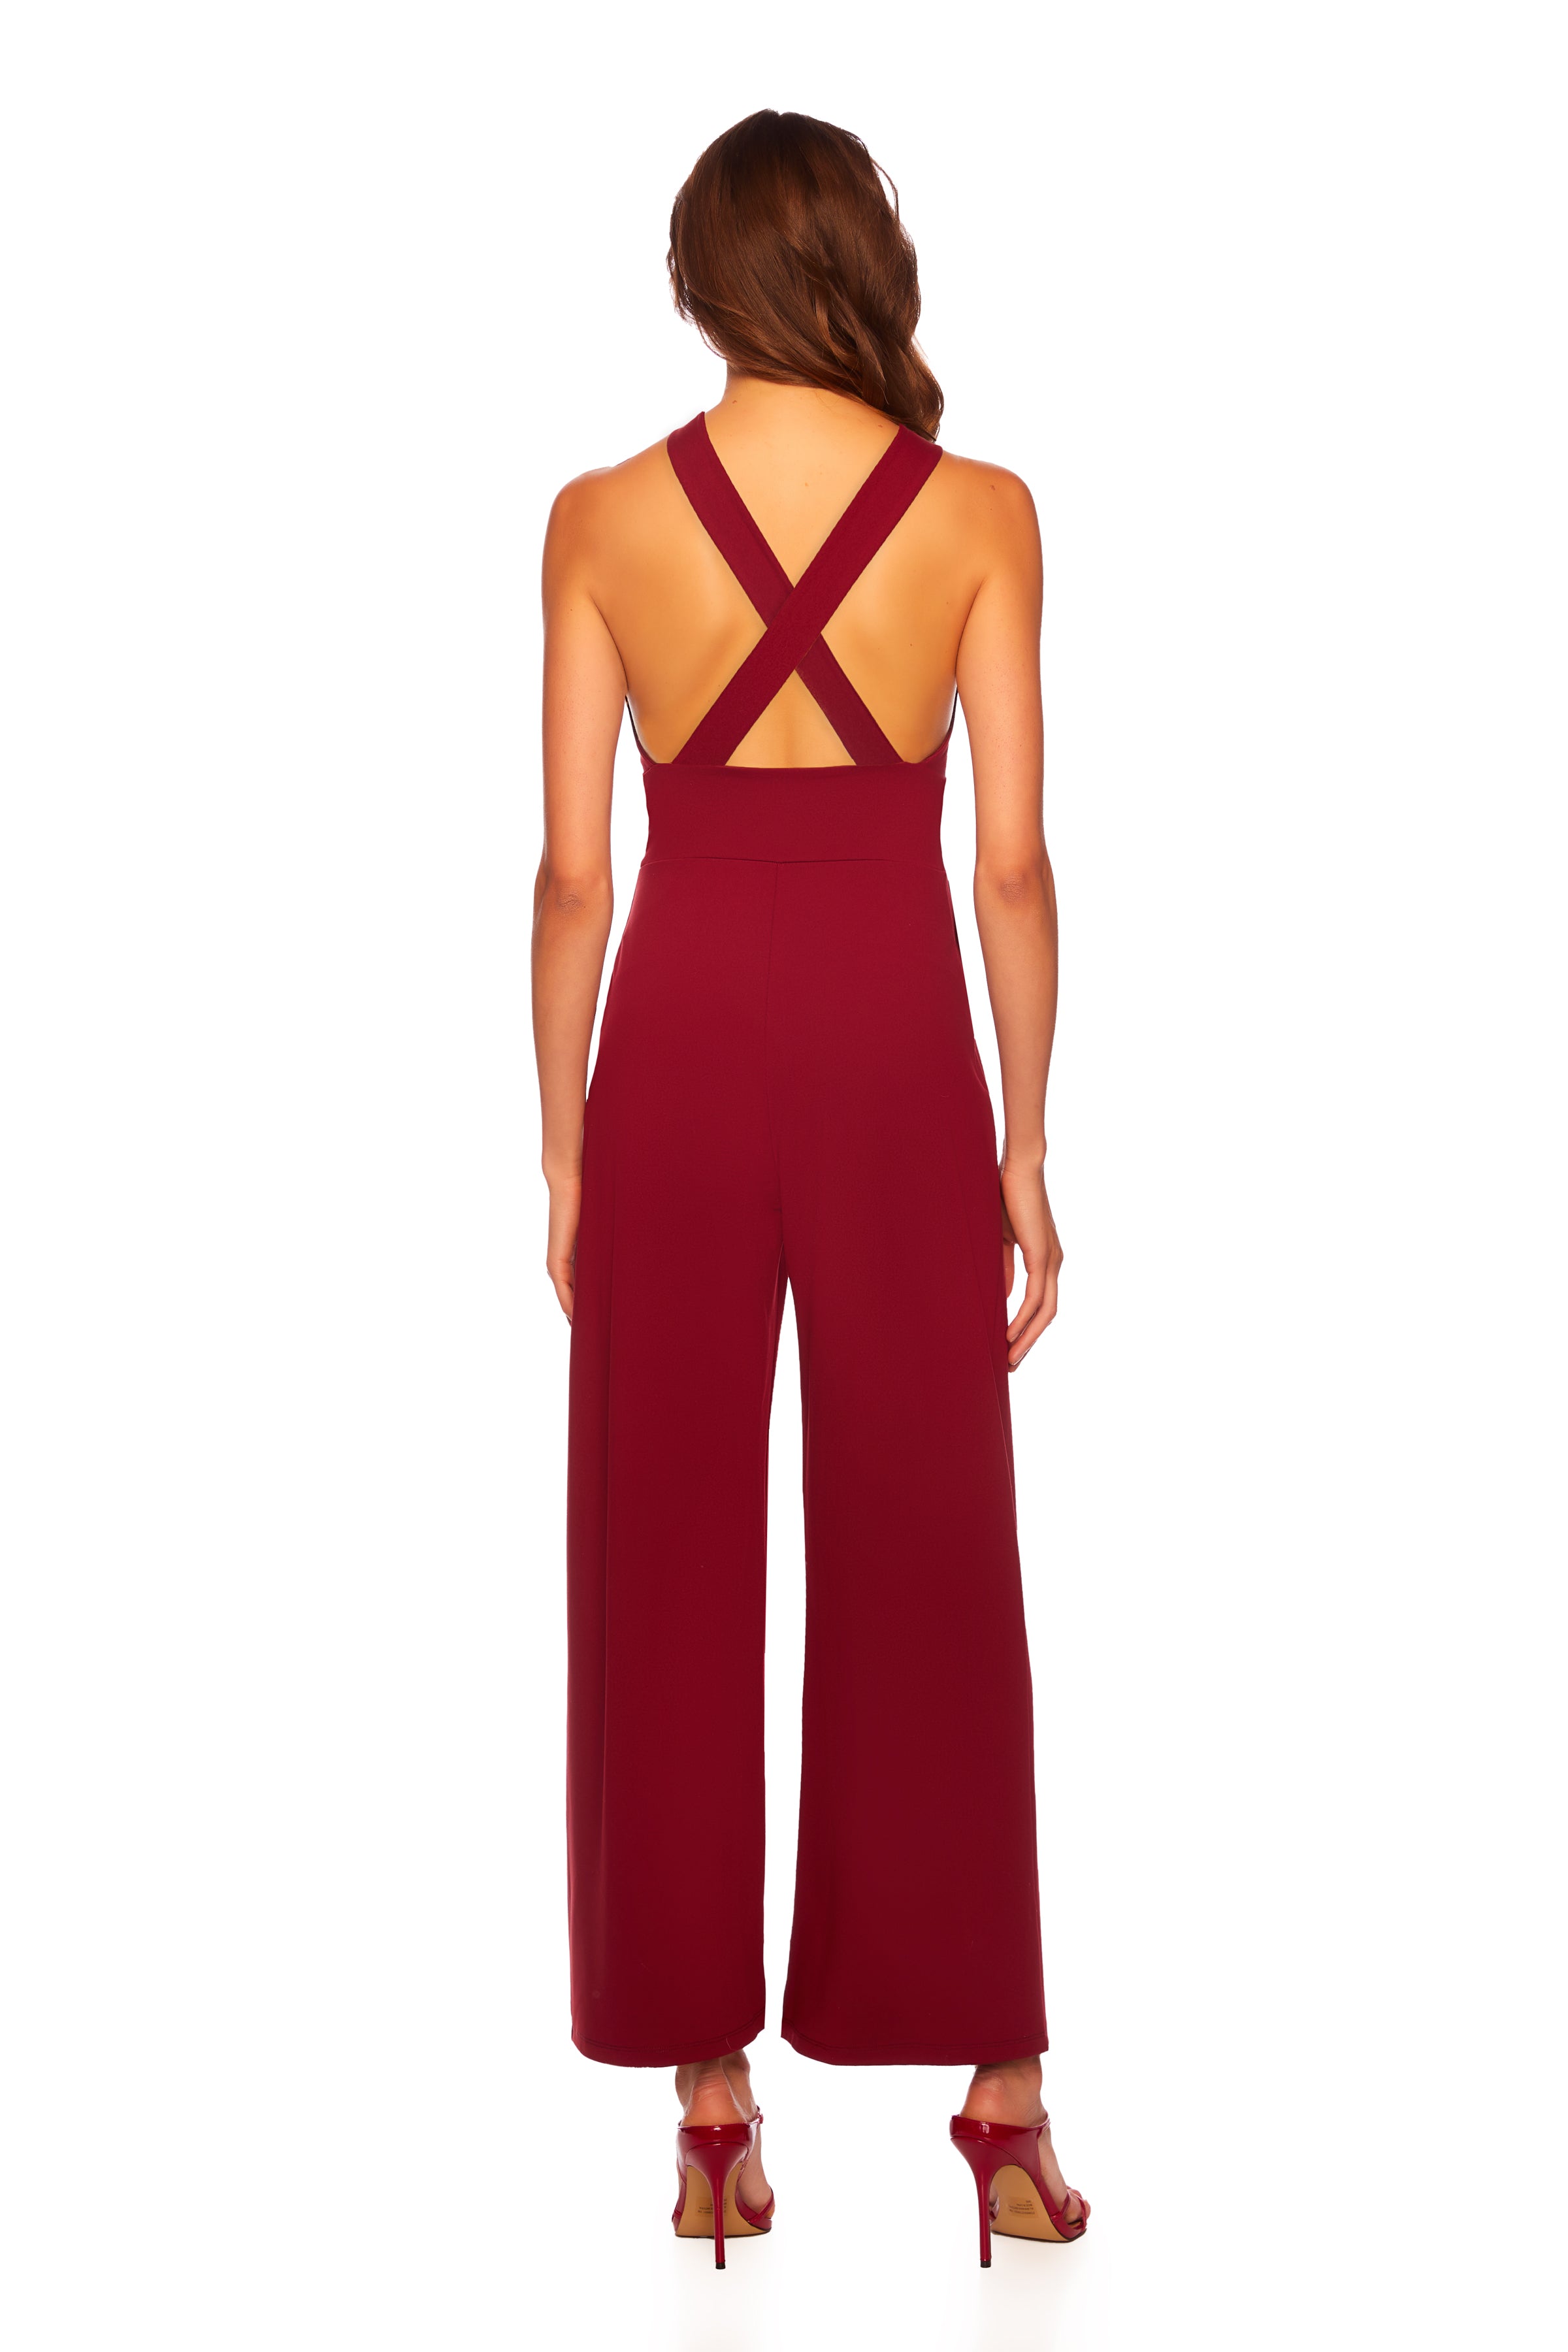 The Ultimate Sexbomb Leather Jumpsuit – Sunset and Swim